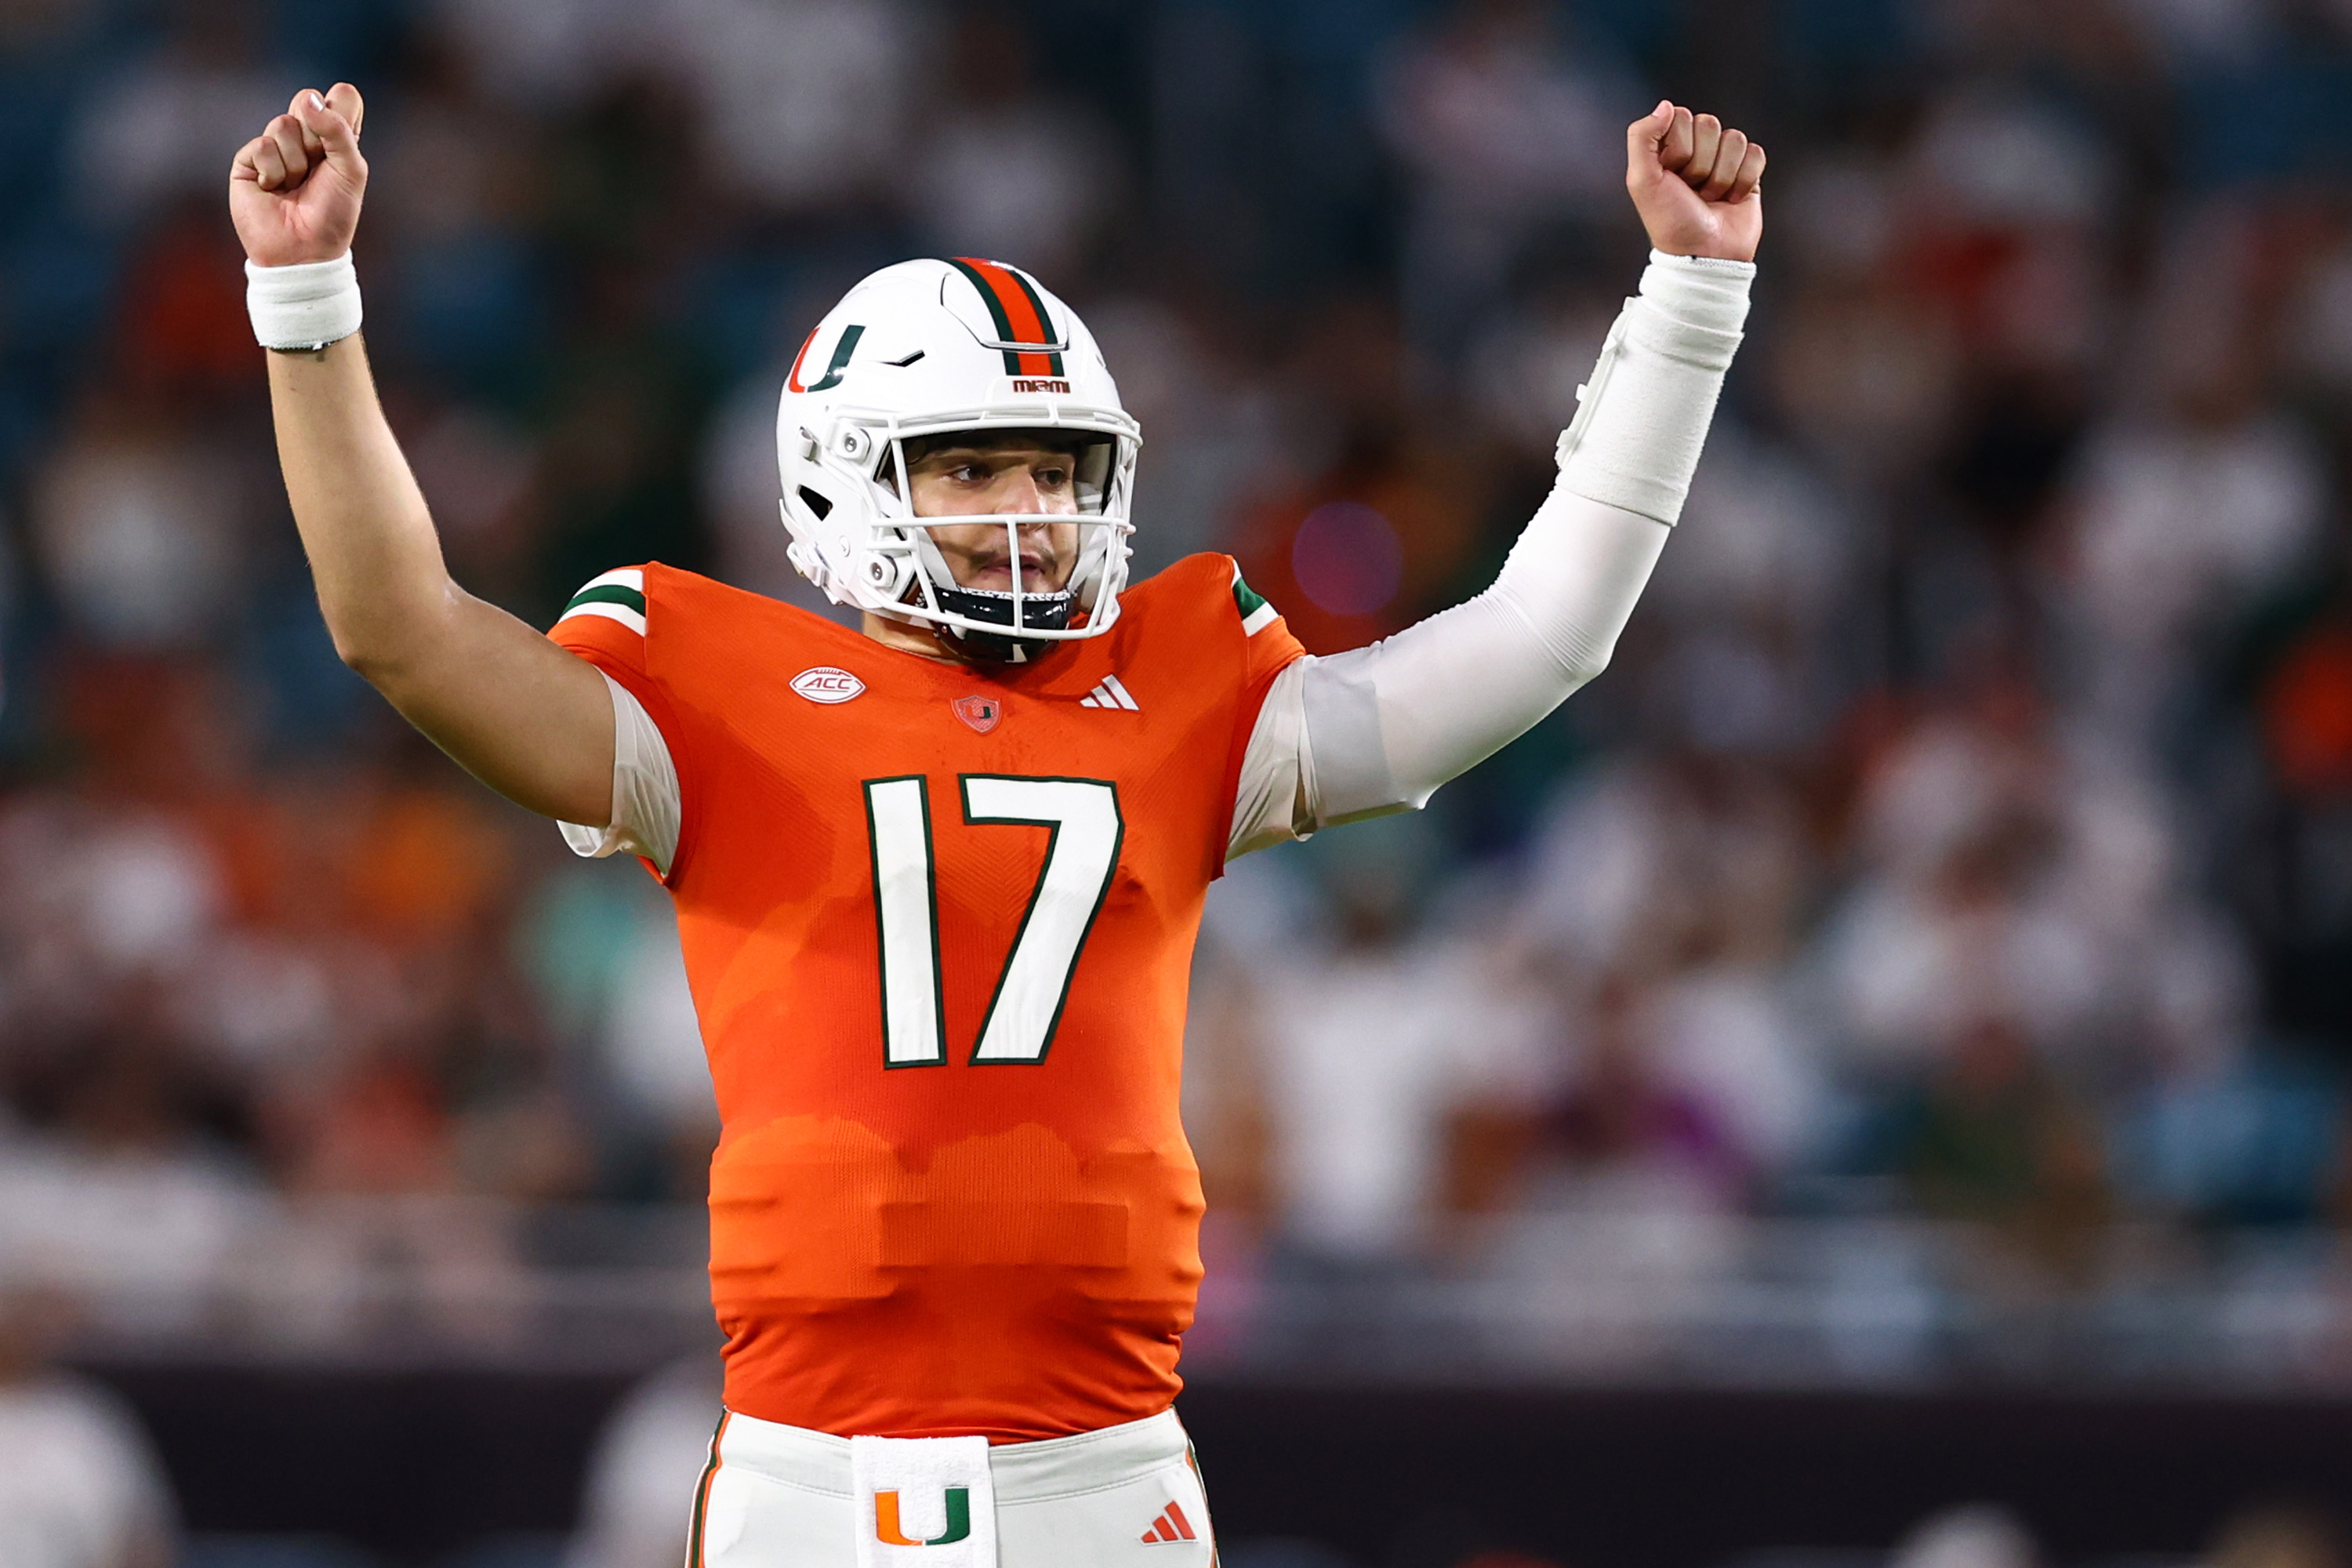 Without Van Dyke, Miami rallies and stuns Clemson 28-20 in double OT  thriller